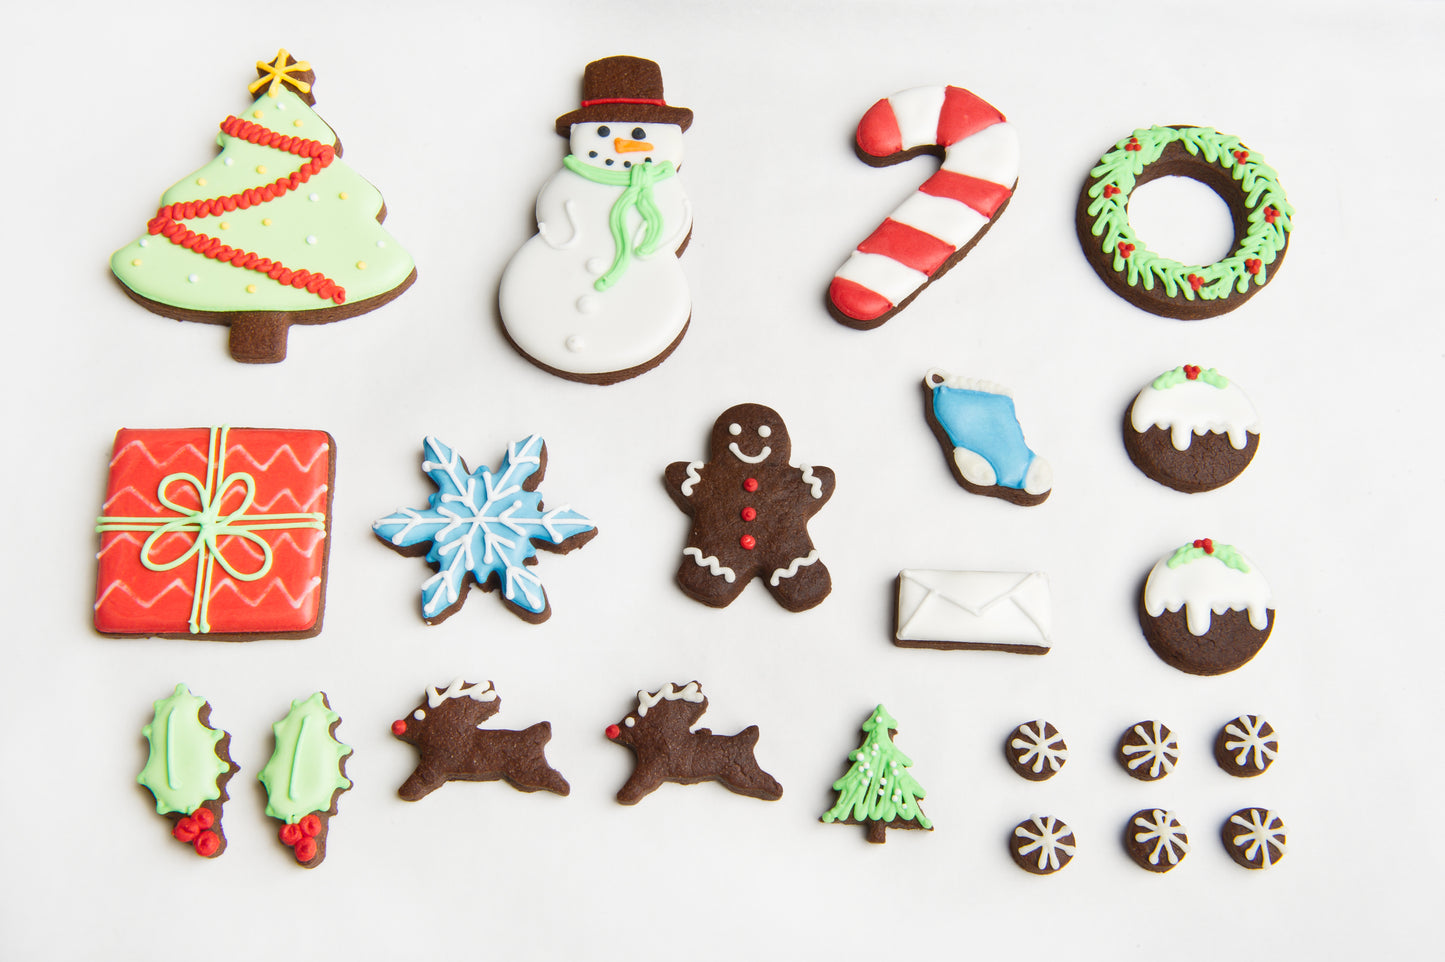 a layout to show the different biscuits included in the Christmas tin. Iced cookies include present, reindeer, snowman, Christmas tree, holly, wreath and mini snowflakes.